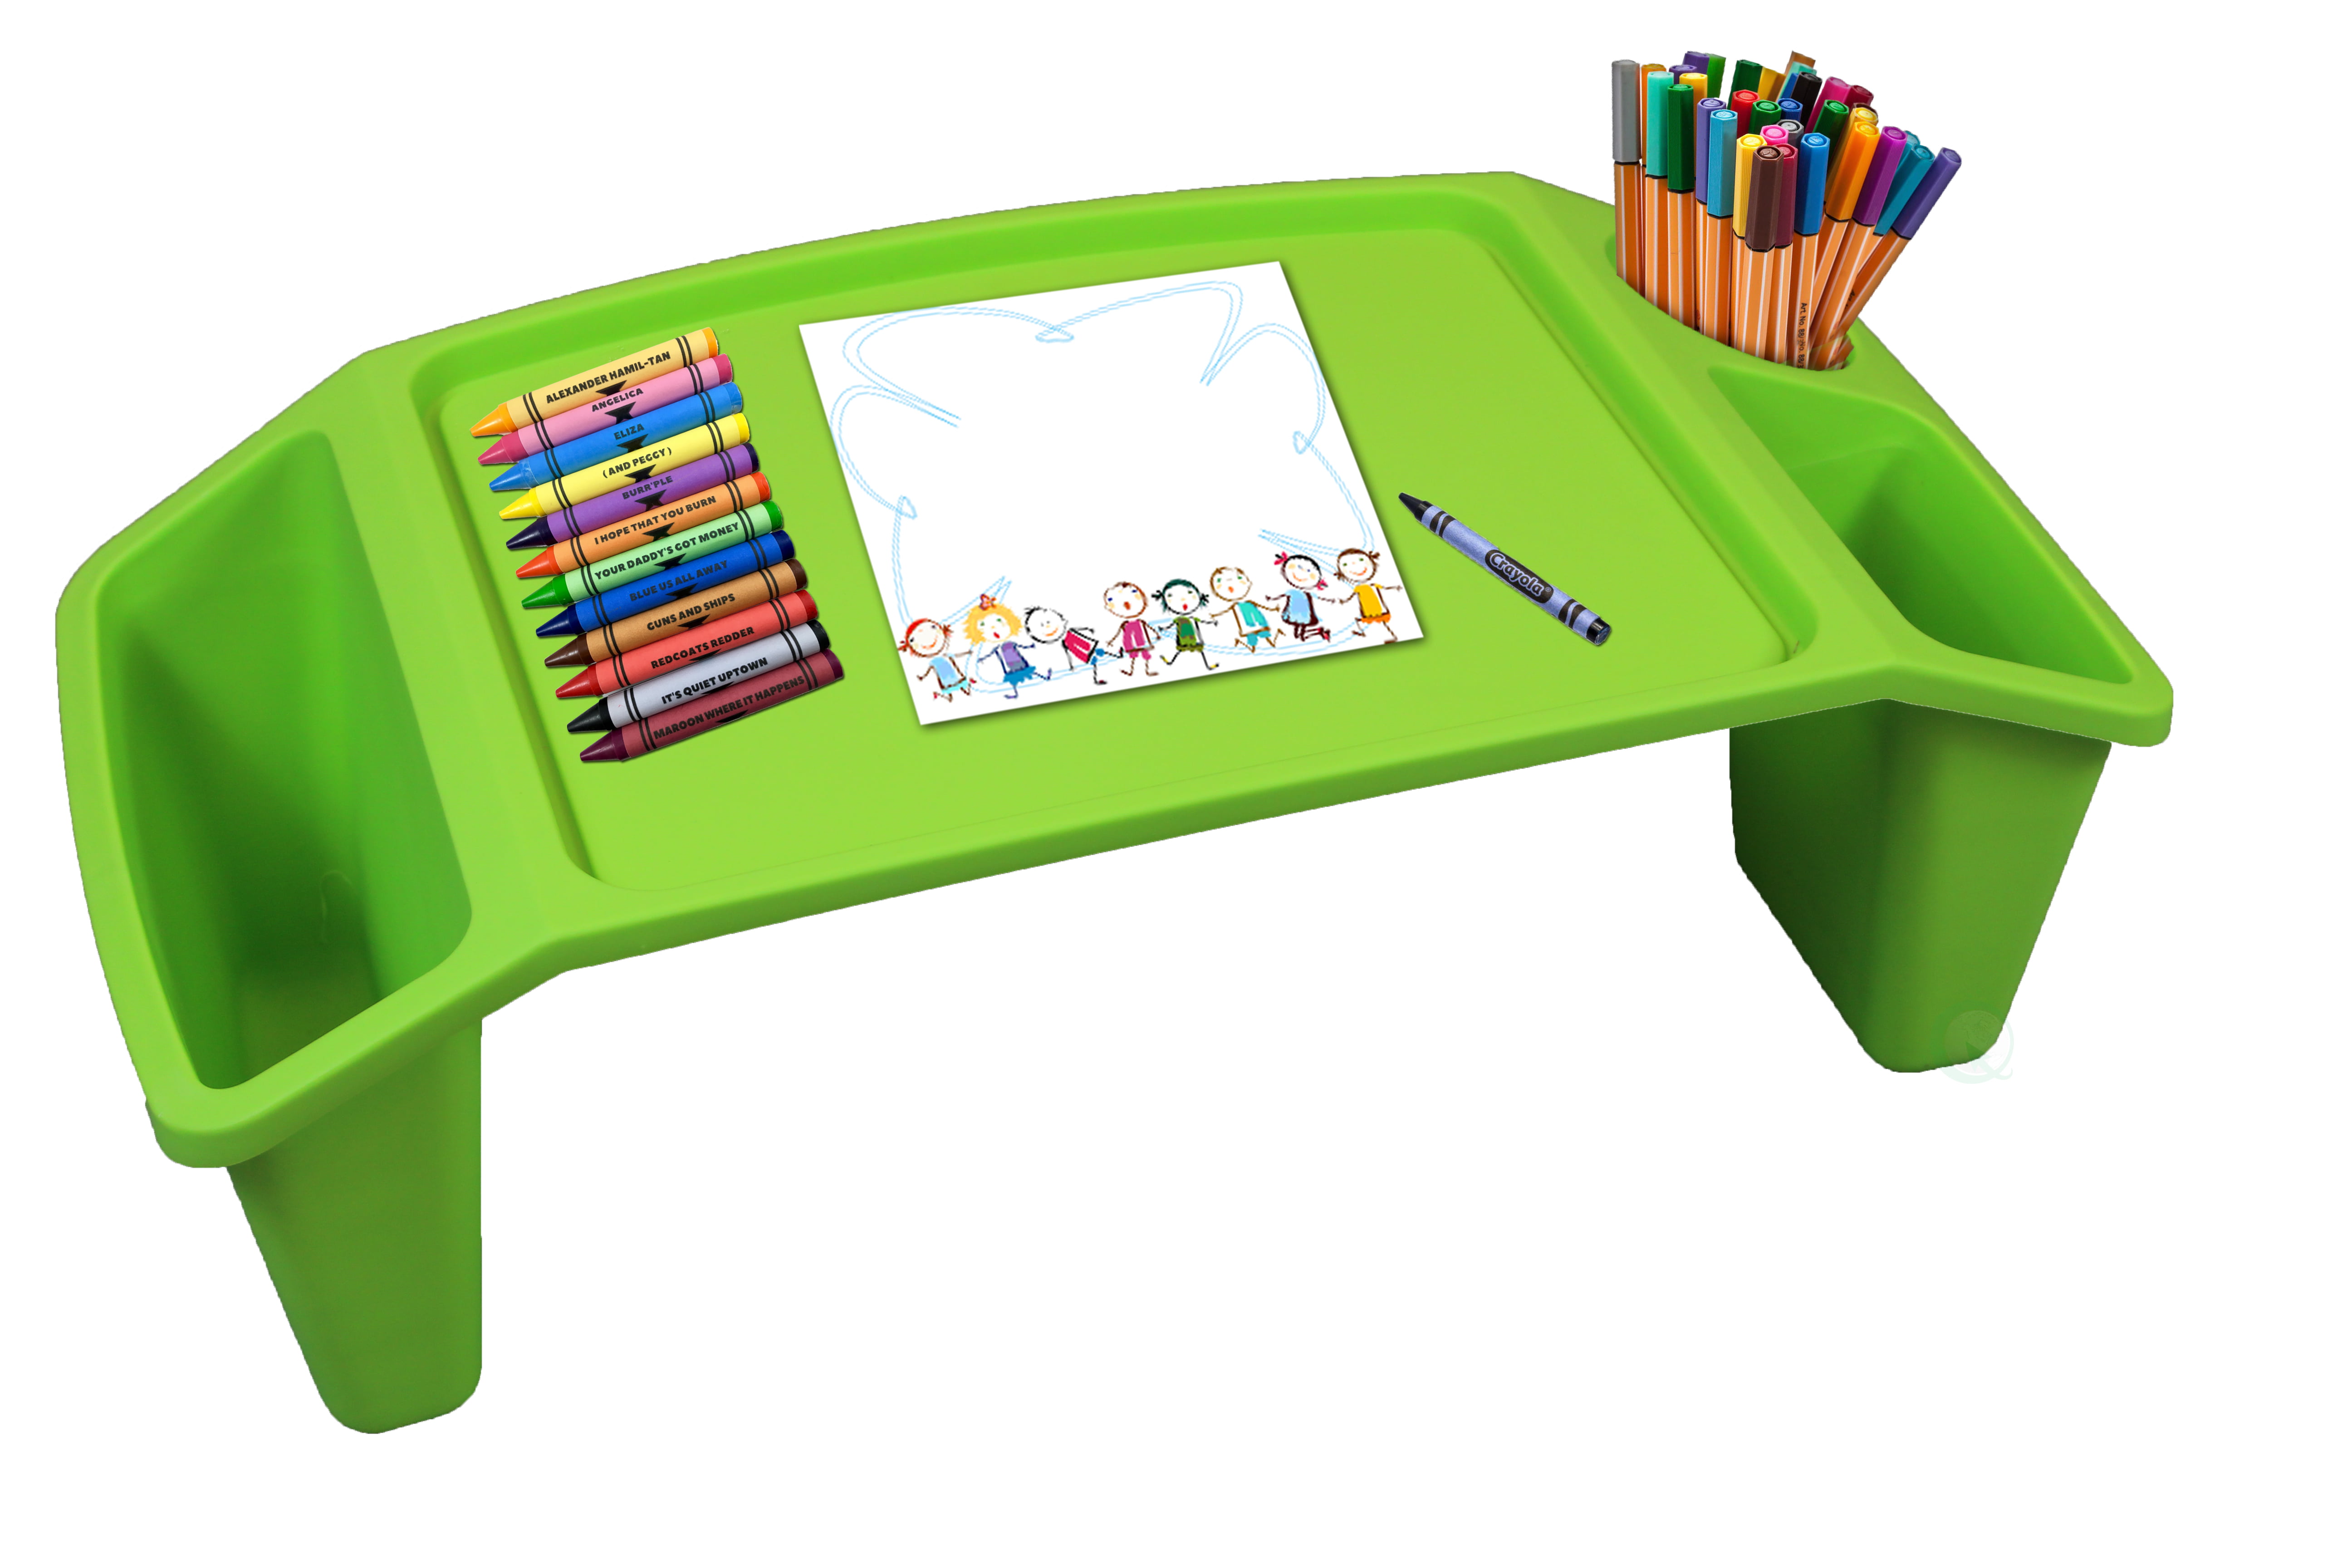 Plastic Cartoon Children Small Study Table With Storage Lap Laptop Desk For Kid 